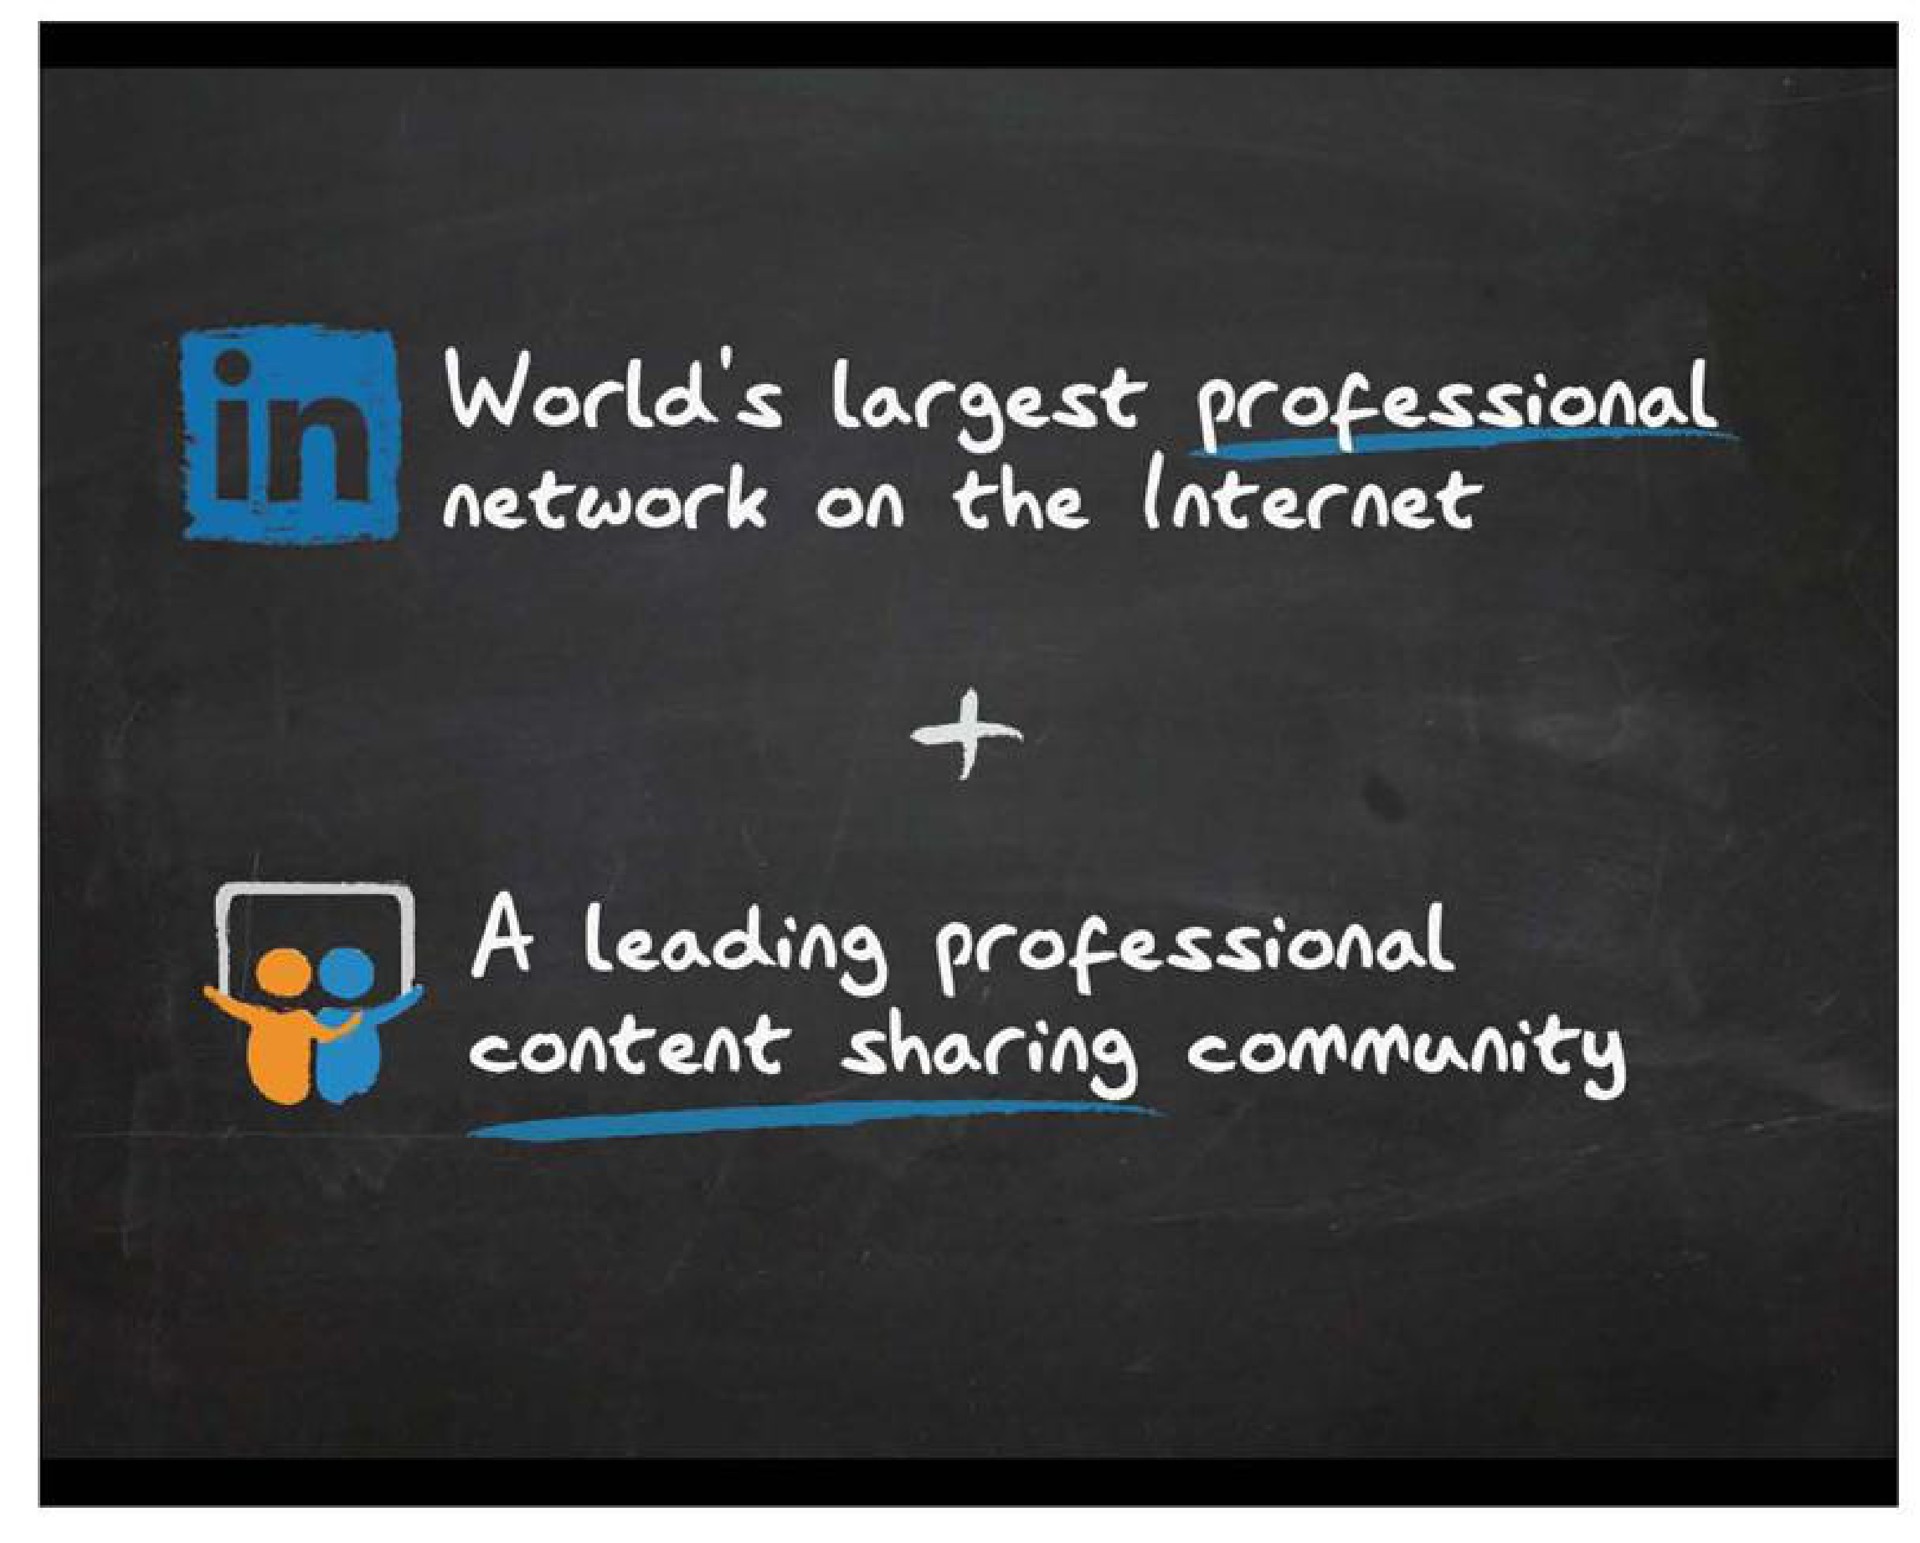 world professional network on the a per content sharing community | Linkedin